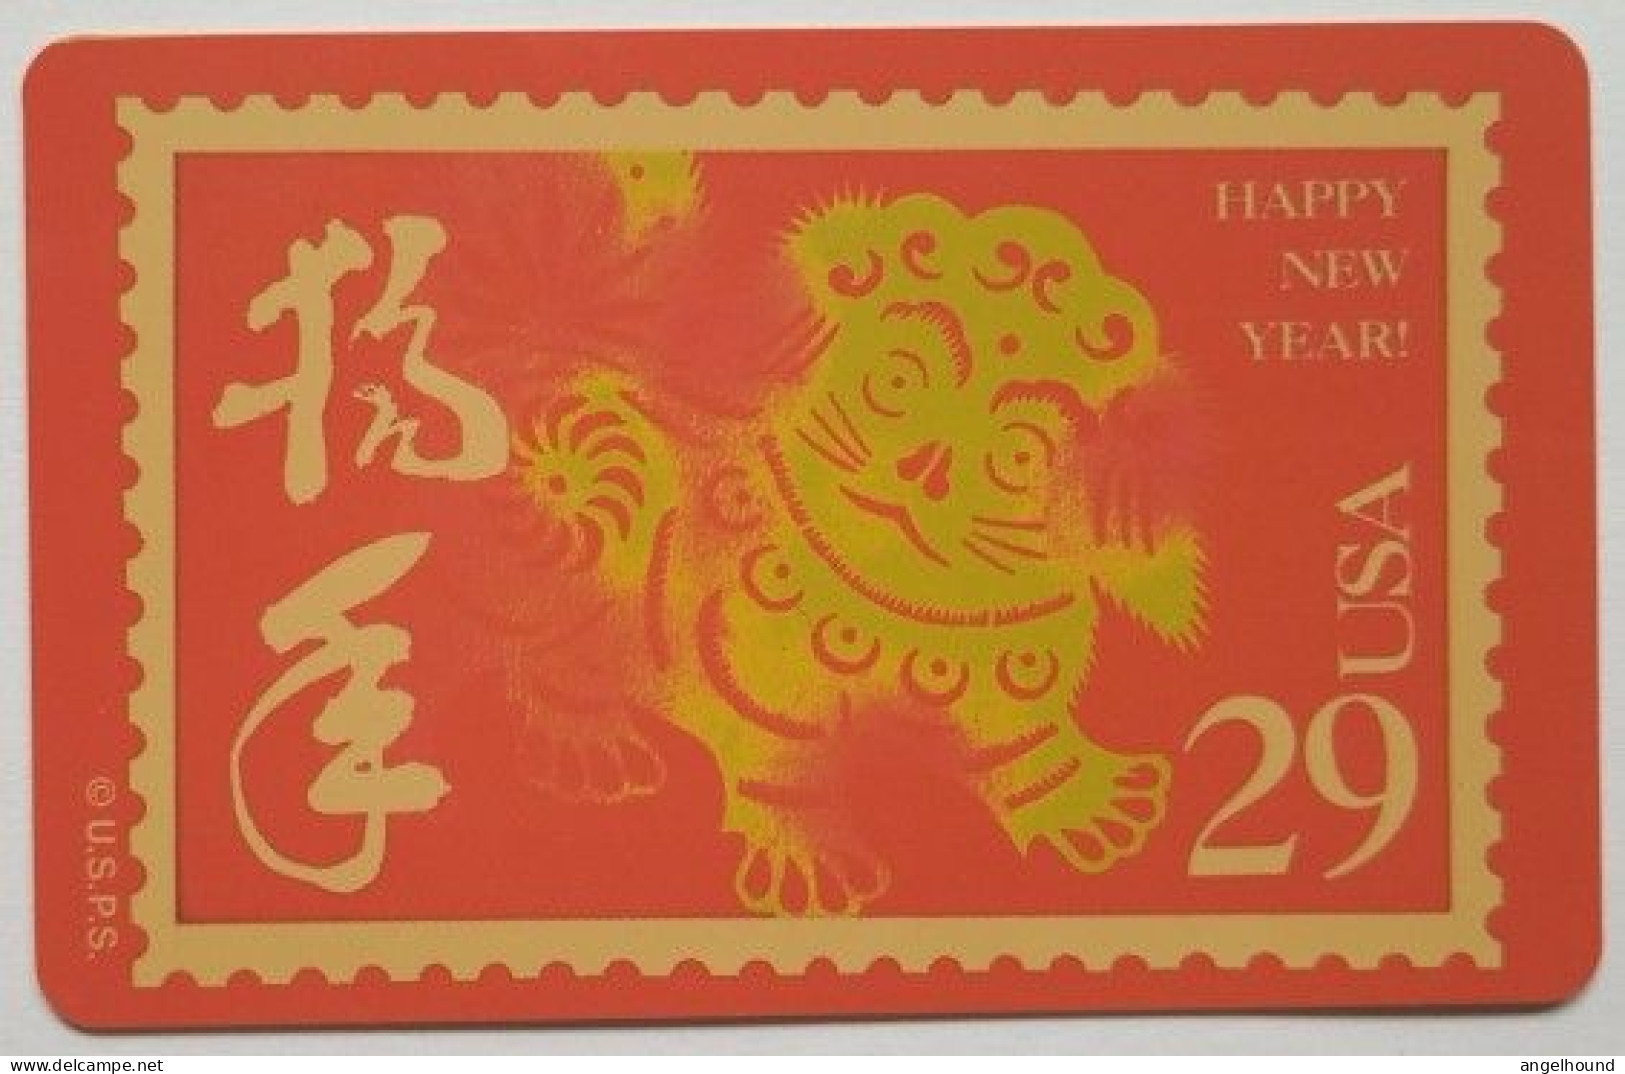 USA GTS  $10 MINT " Stamps - Chinese Year Of The Dog - GTS